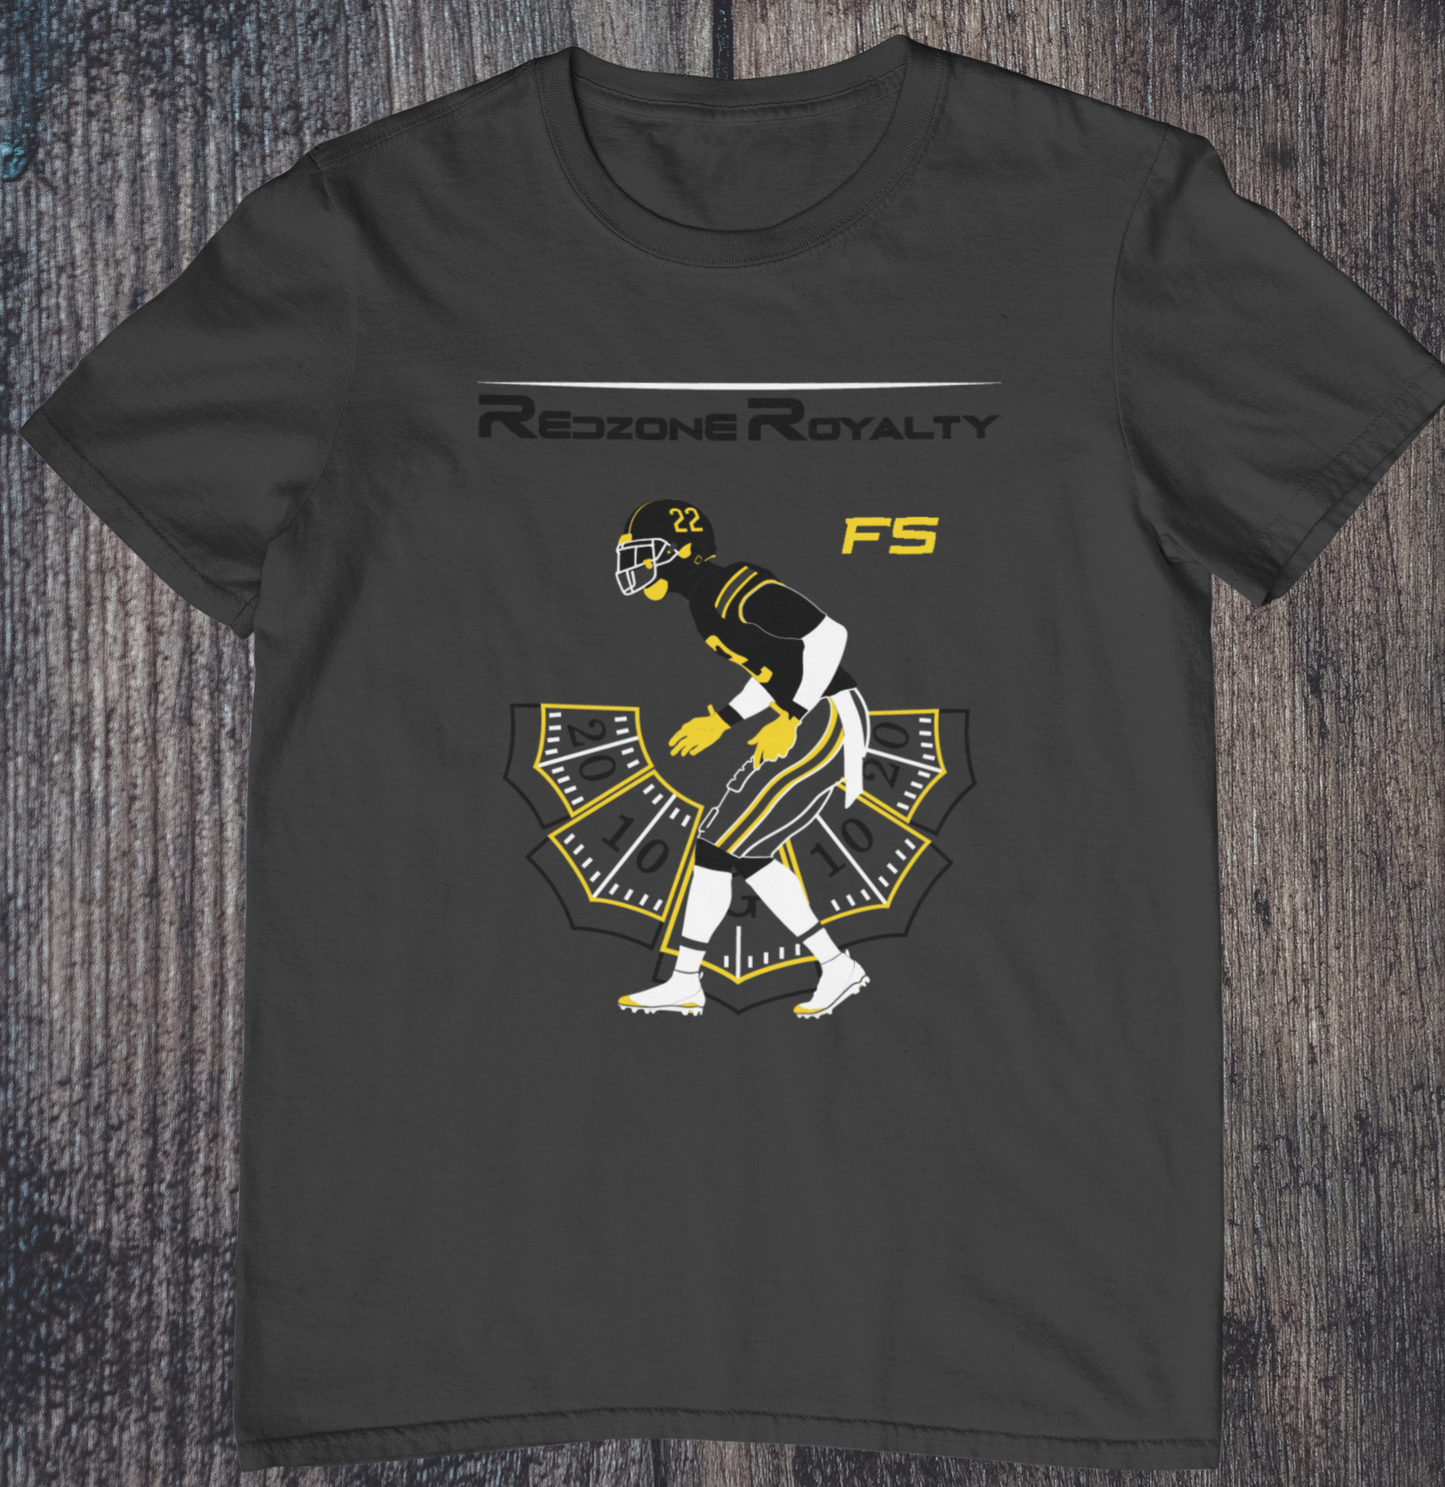 Graphic Football T Shirt : Free Safety